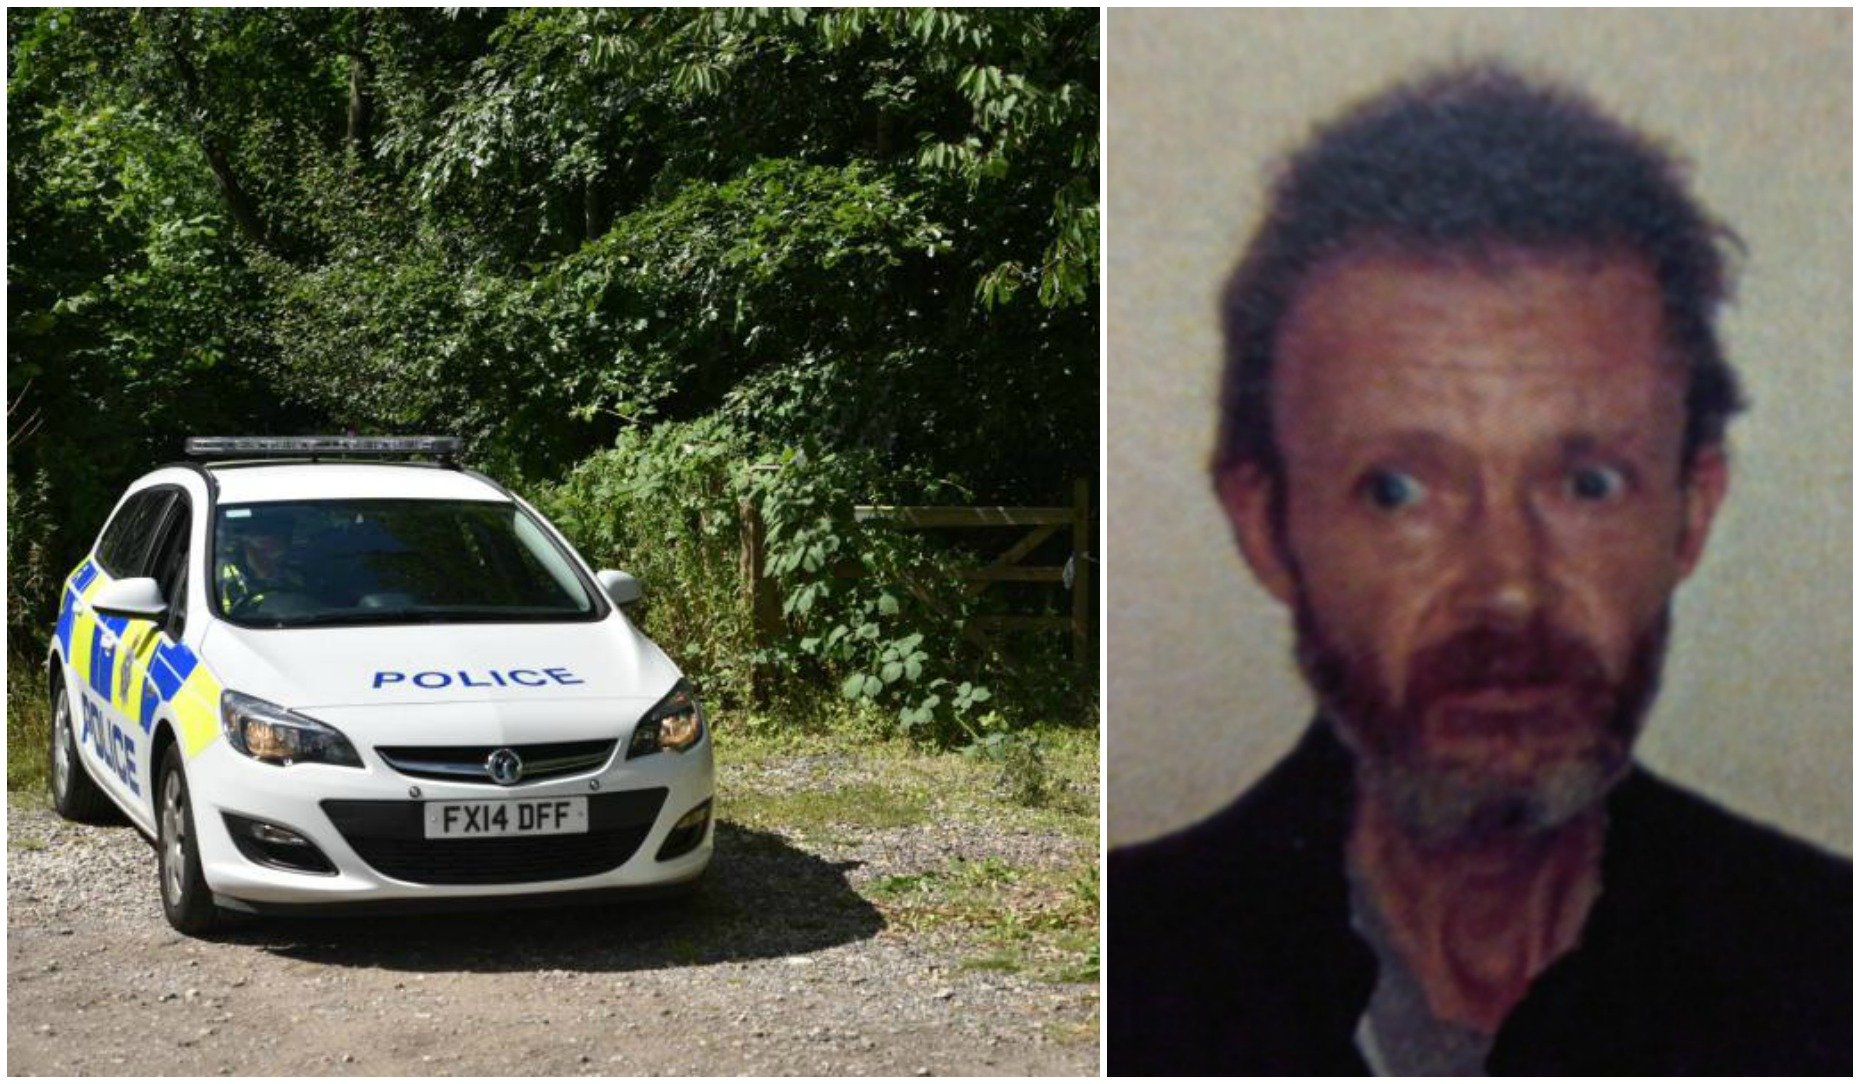 After a long search appeal issued with the picture above, Karl's body was sadly found in a tent in Lincoln.